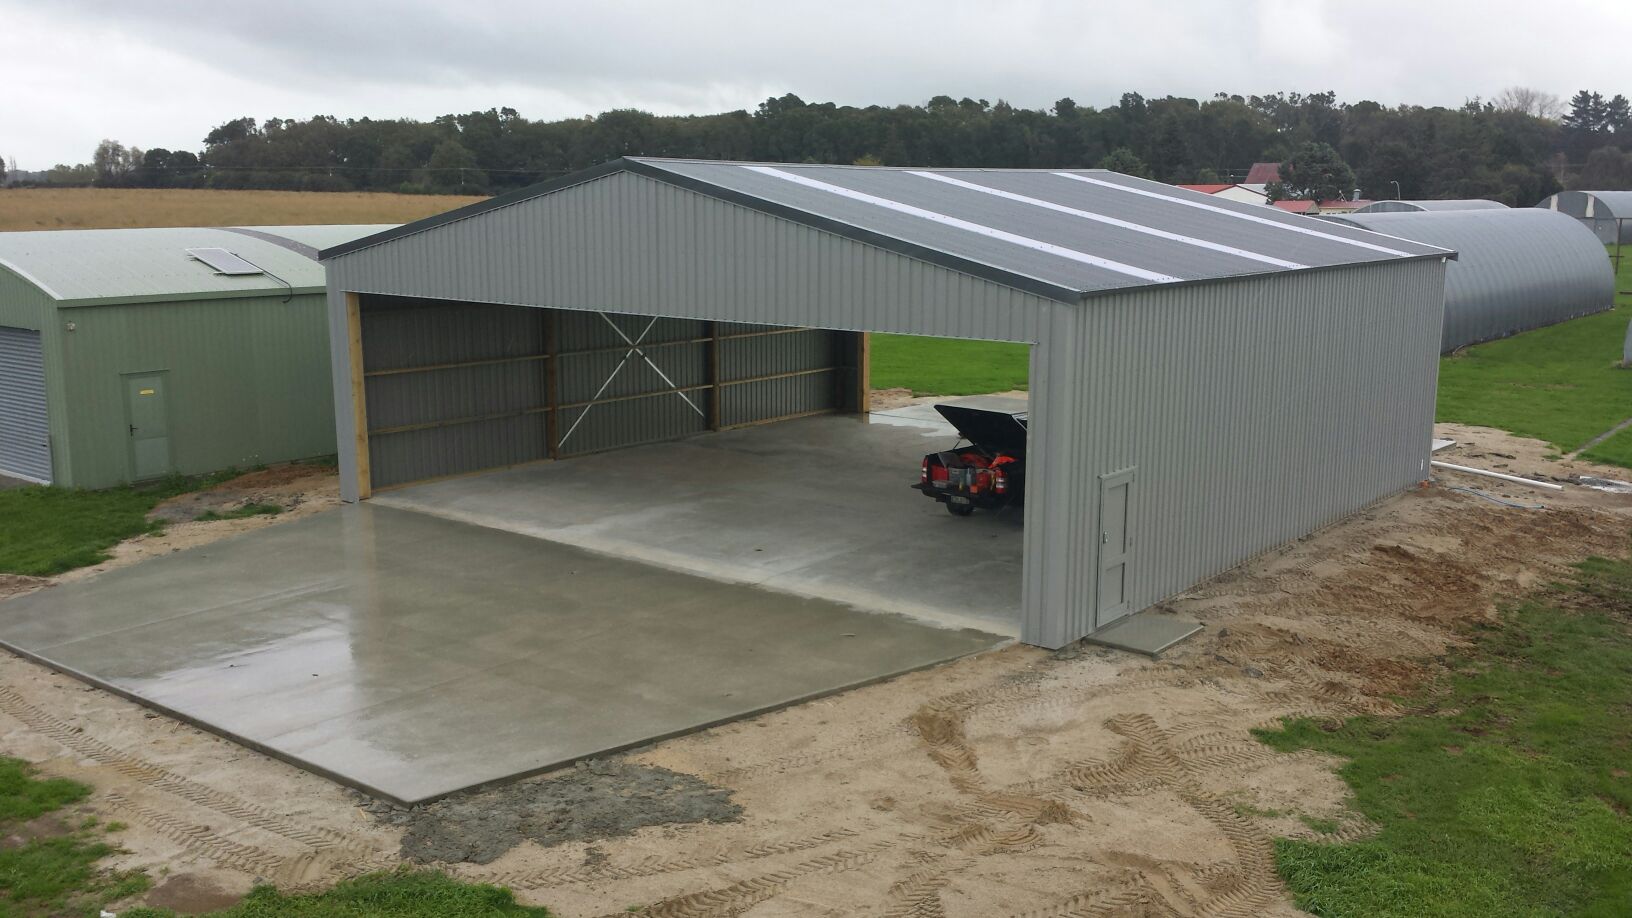 Extra large clearspan sheds are our specialty